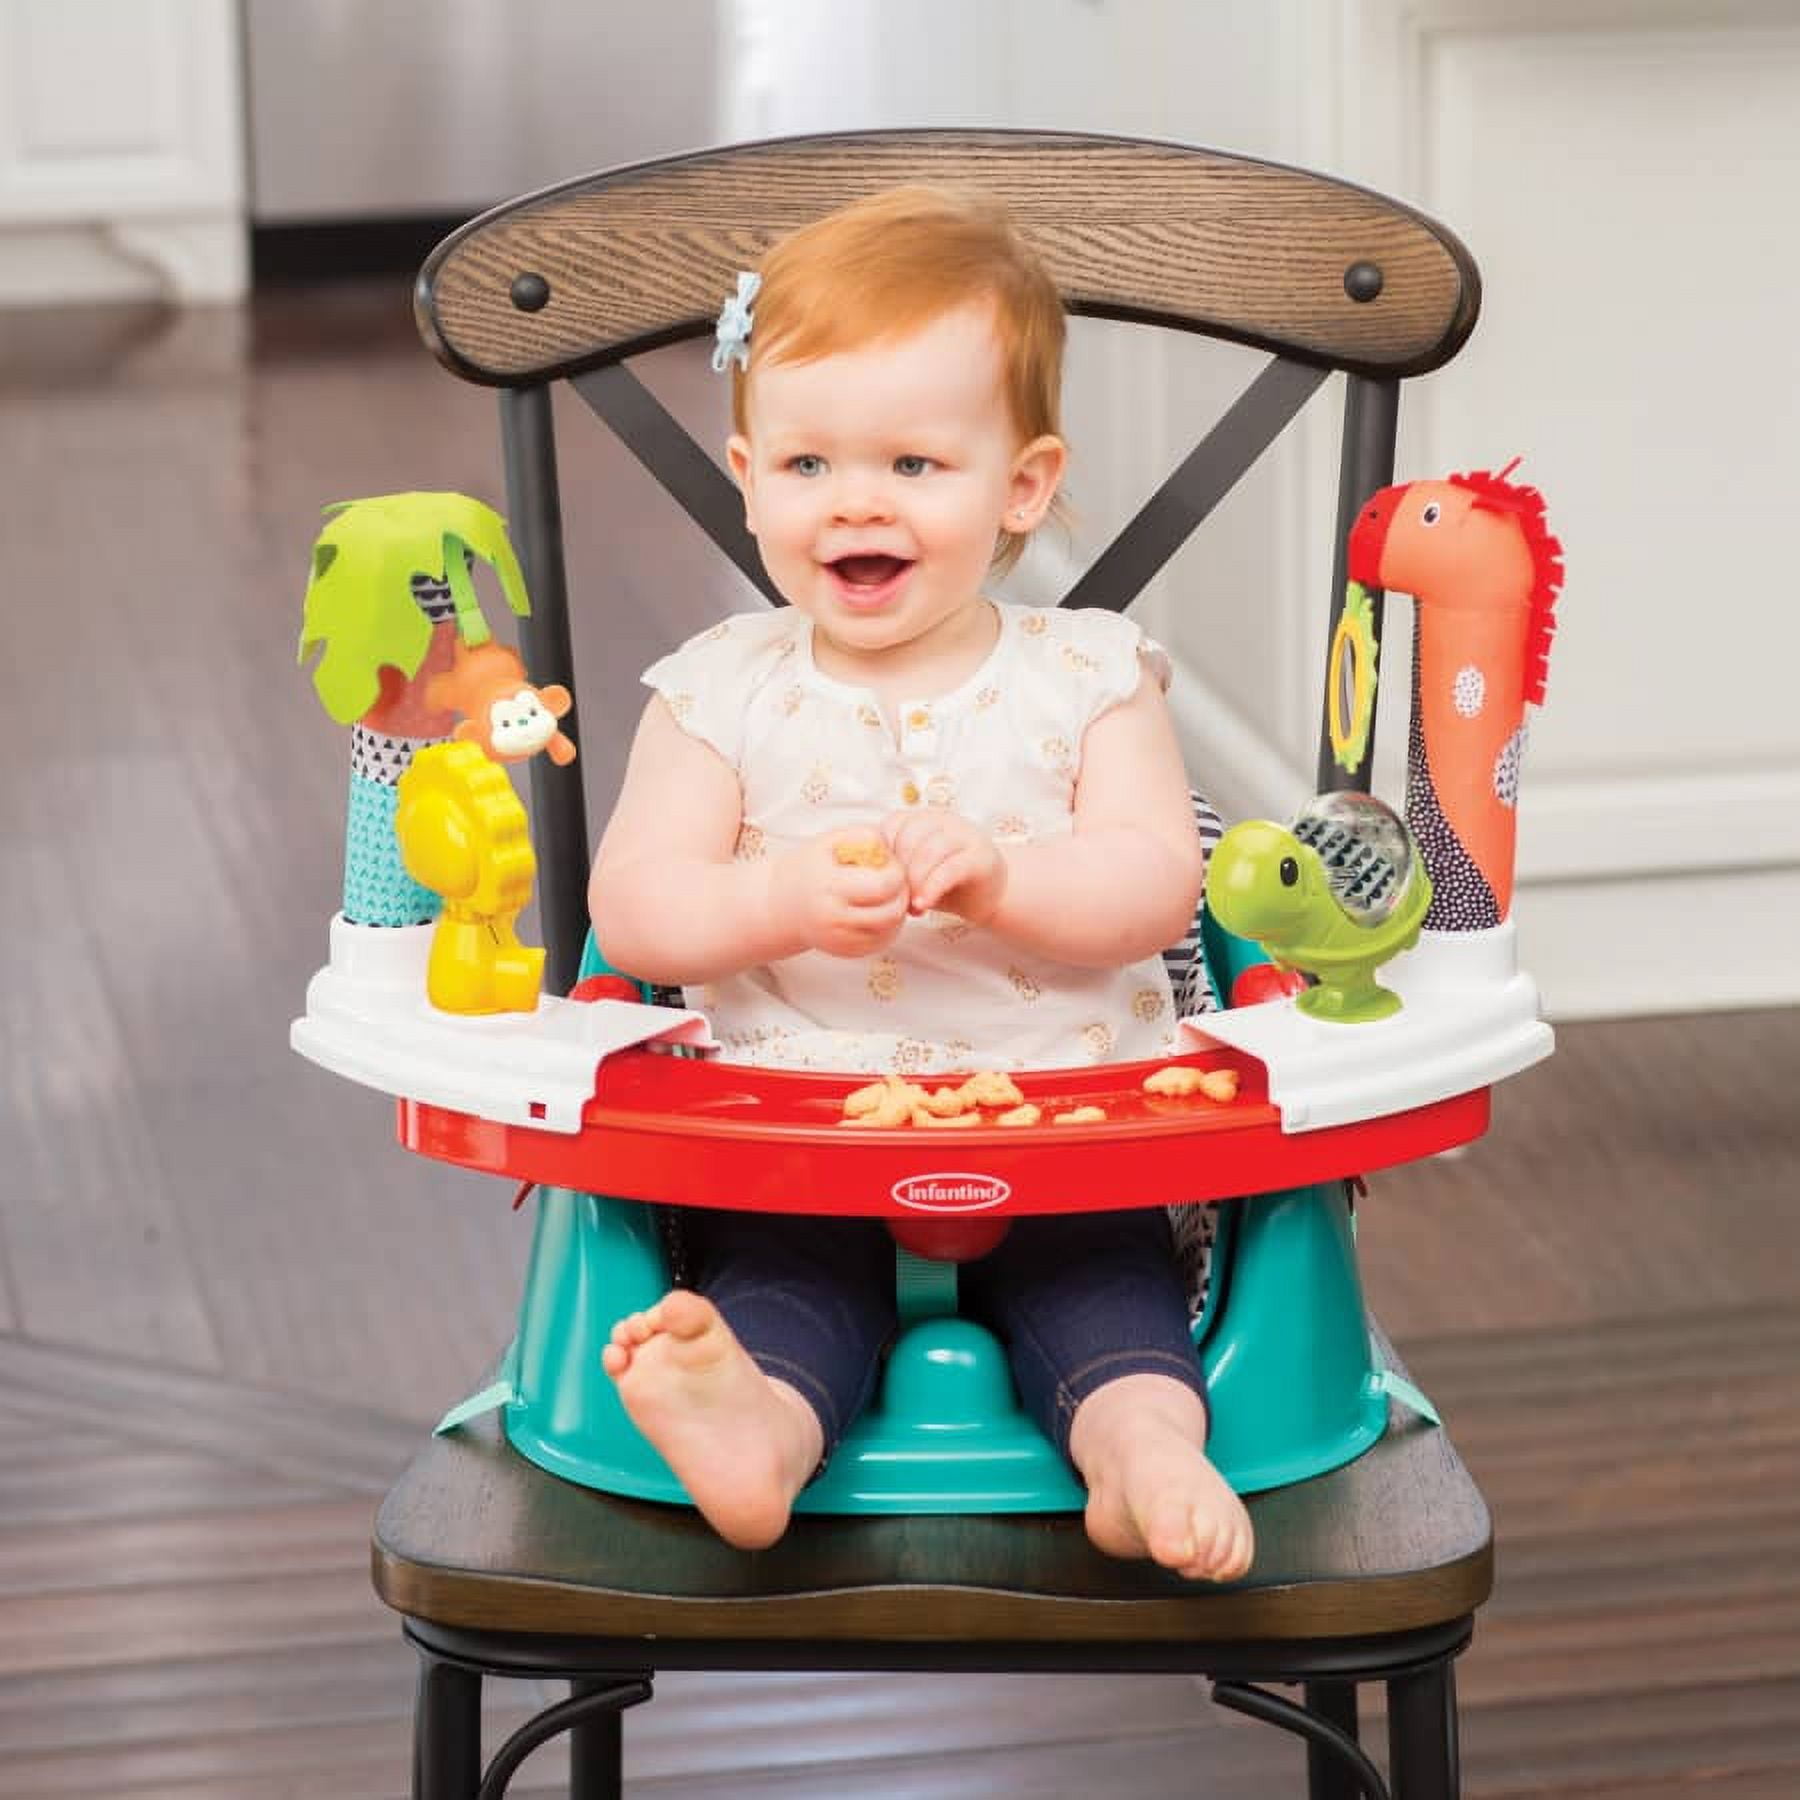 Grow-With-Me 4-in-1 Two-Can-Dine Feeding Booster Seat, Fox – Infantino